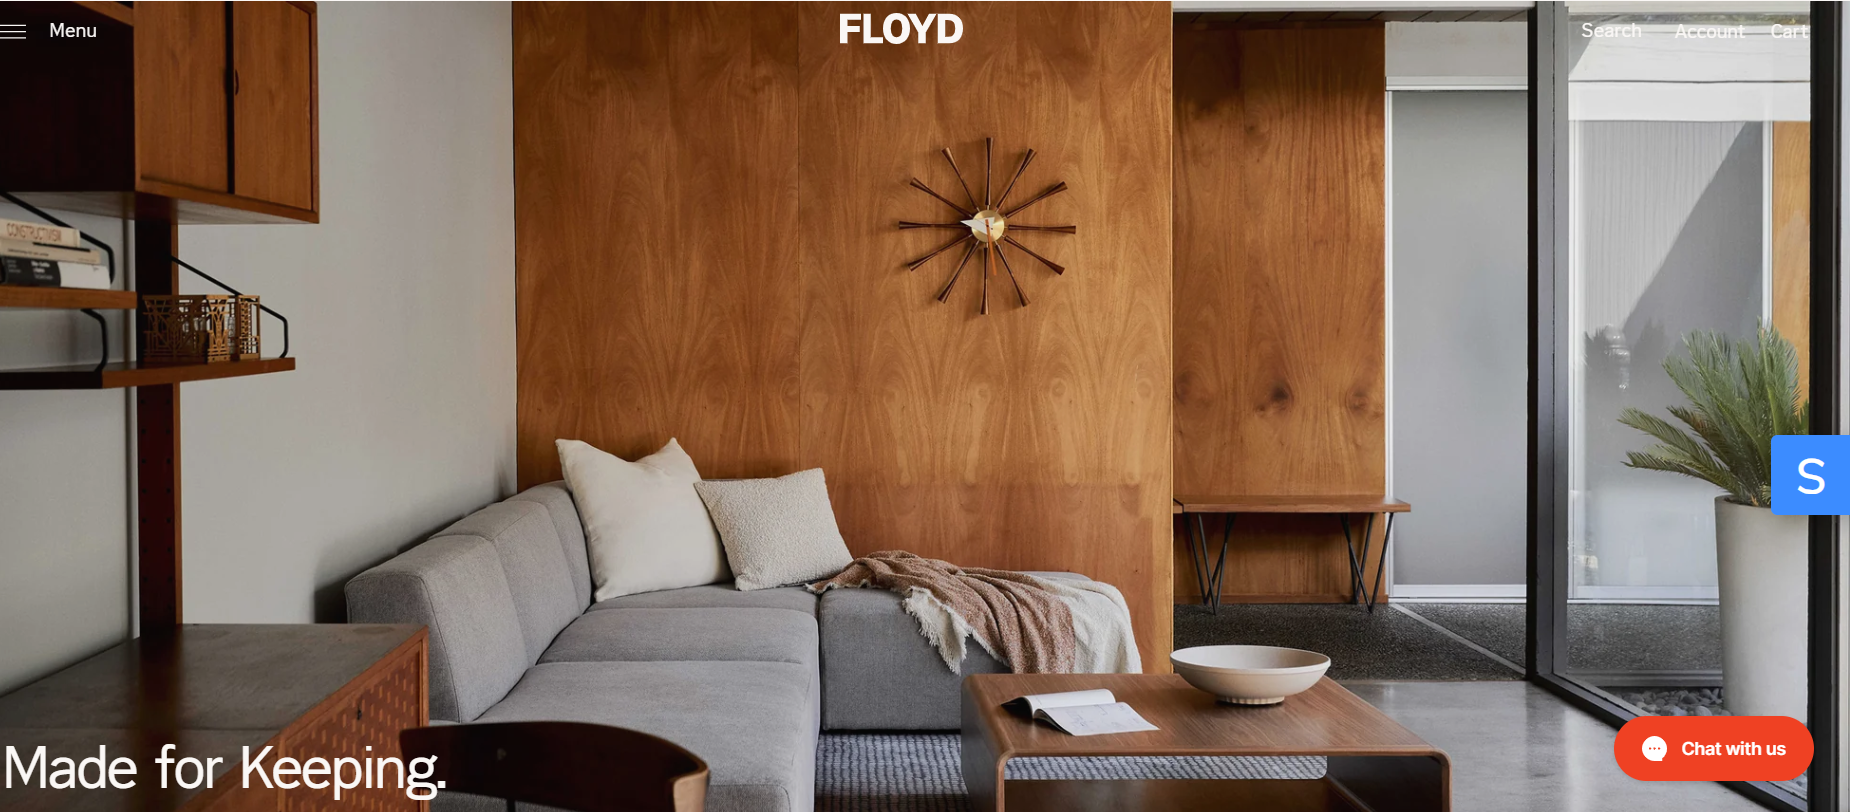 FloydHome specializes in minimalist, durable, and sustainable modular dropshipping furniture. Their range includes sofas, beds, tables, and shelving units designed to adapt to various living spaces. 